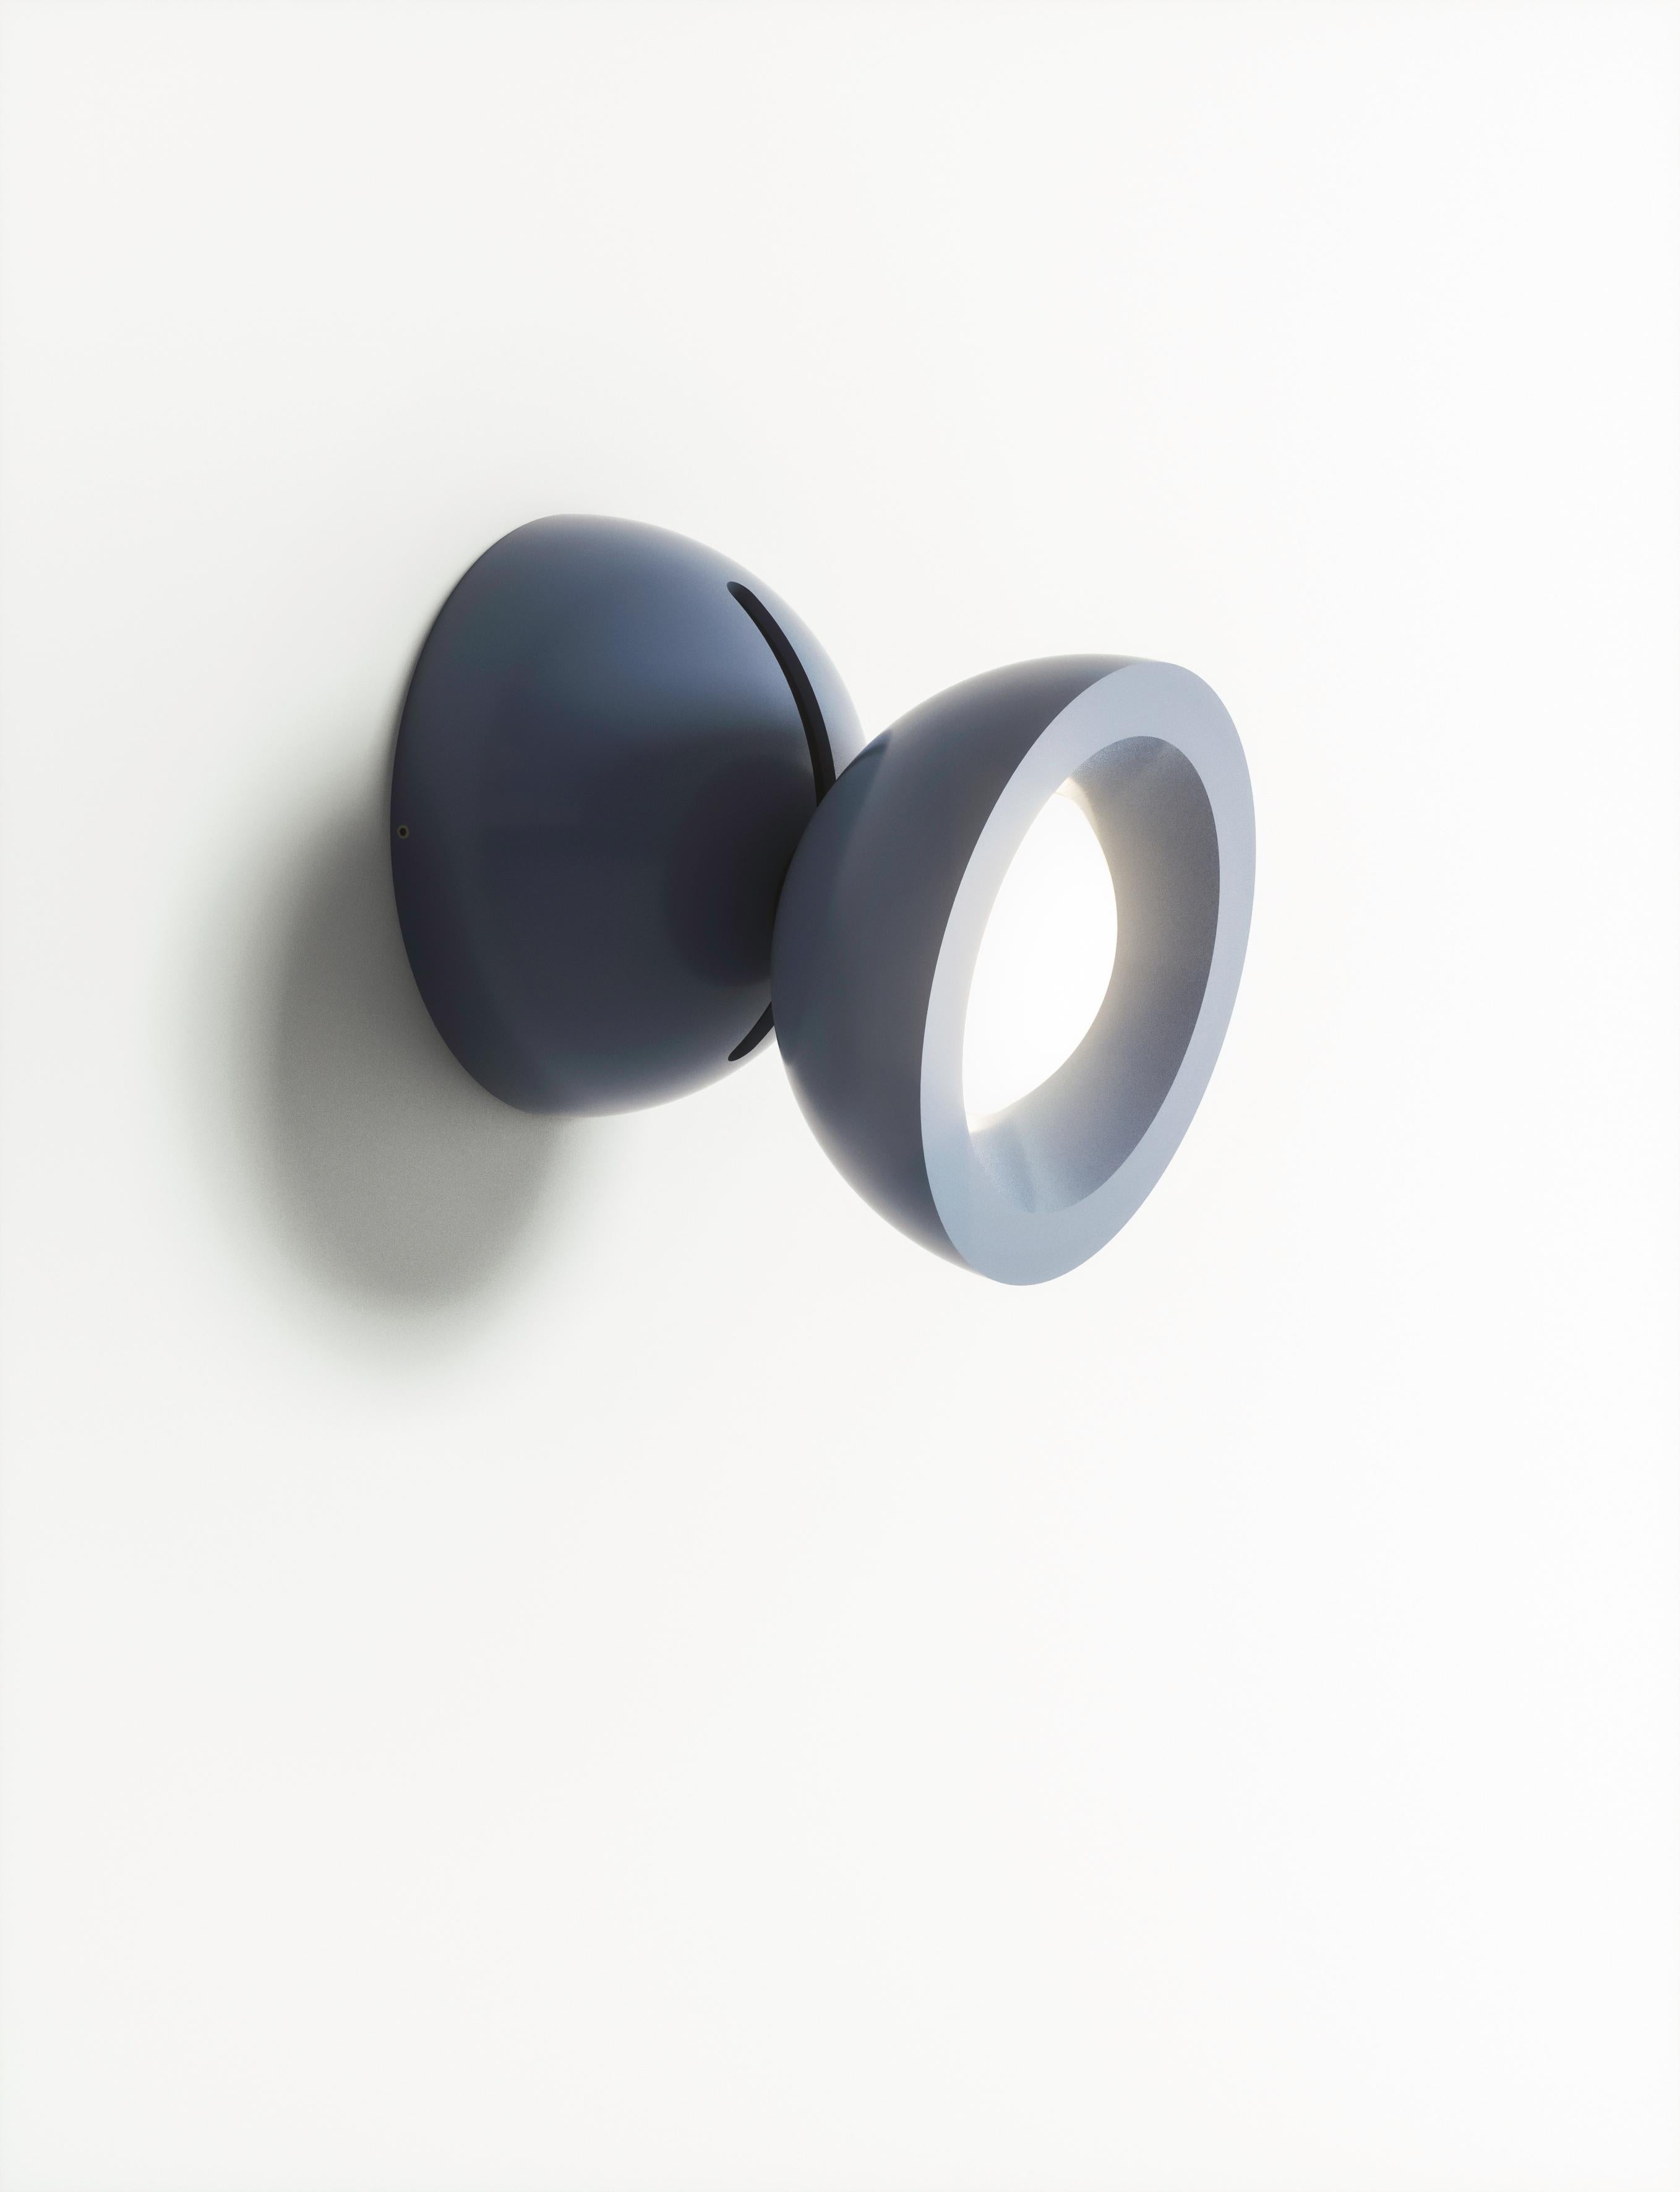 Axolight DoDot Wall/ Ceiling Light in Blue Aluminum by Simone Micheli

DoDot, the latest creation of architect and designer Simone Micheli is the new adjustable lamp by Axolight, suitable for ceiling and wall

Compact and performing, DoDot is made